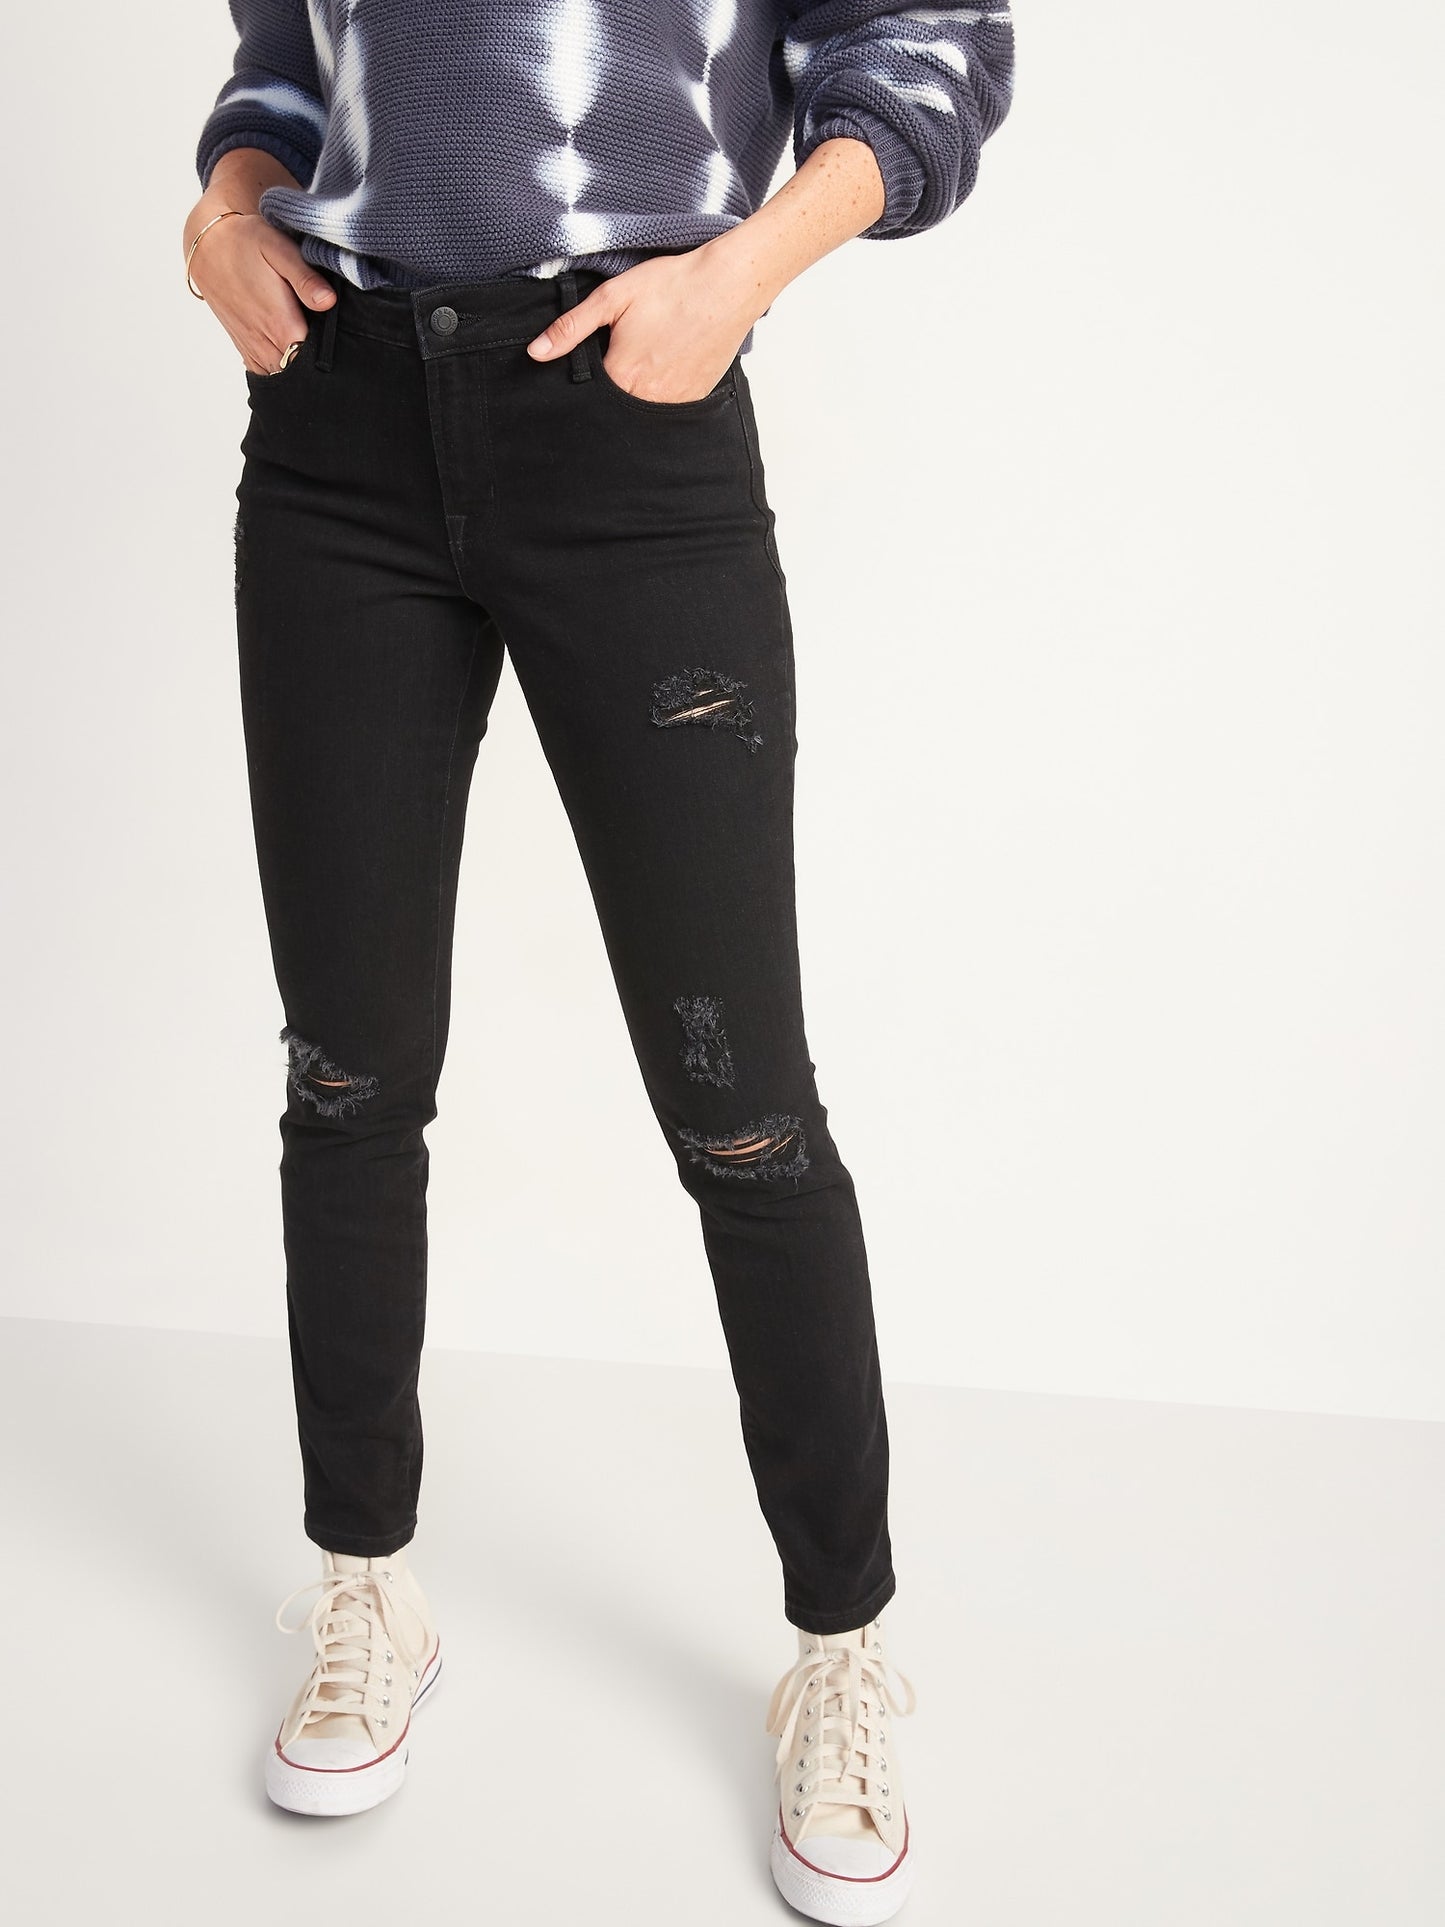 ON Mid-Rise Pop Icon Skinny Black Ripped Jeans For Women - Black Jack